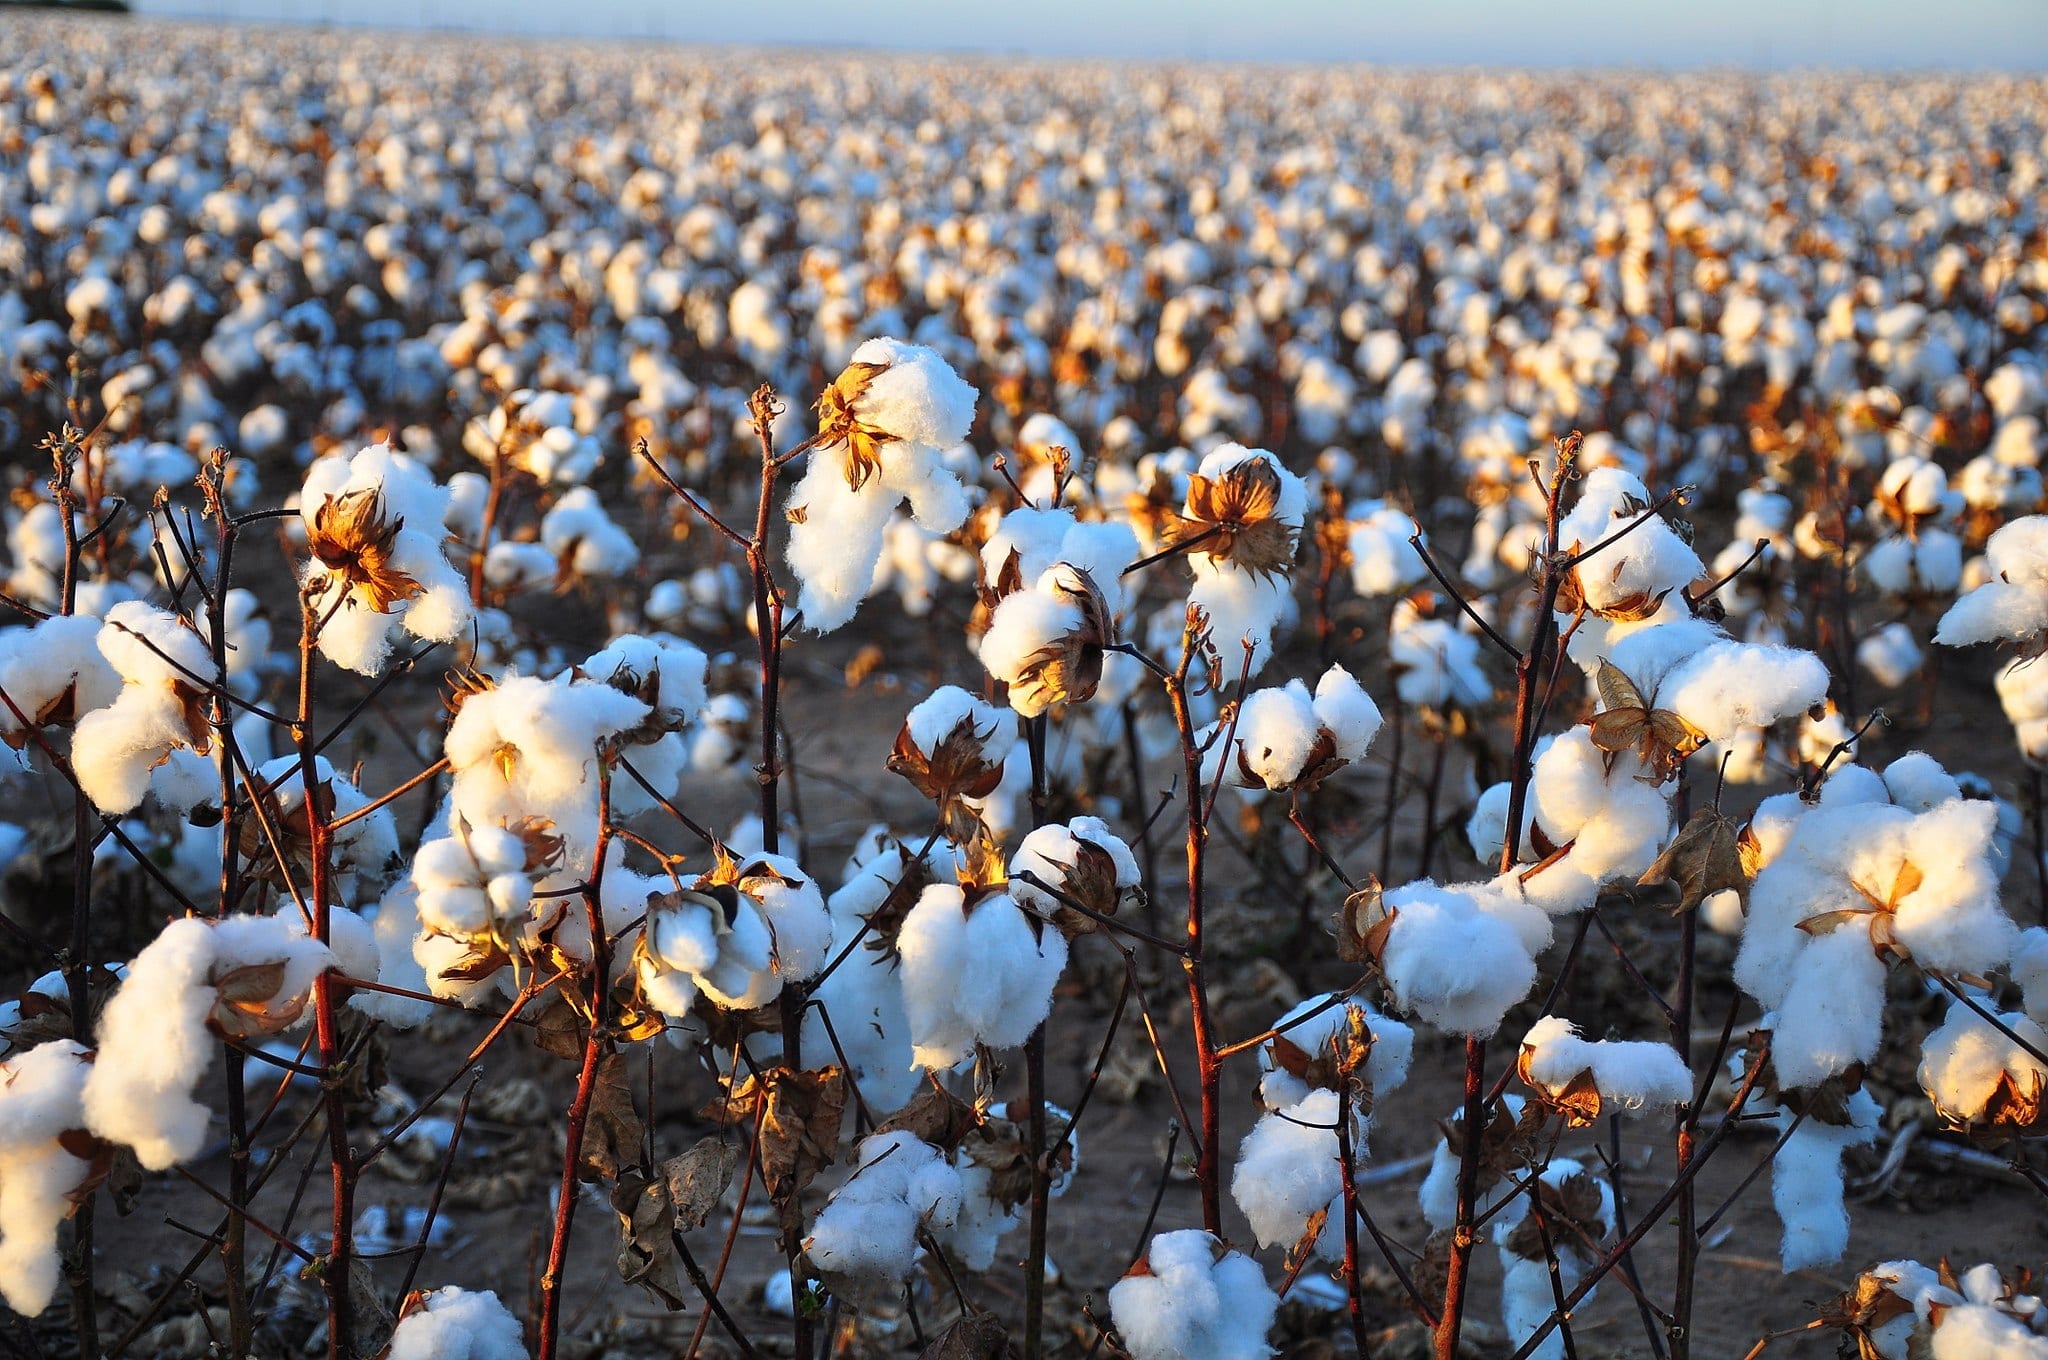 Turkmenistan cotton harvest continued to use forced labor in 2020